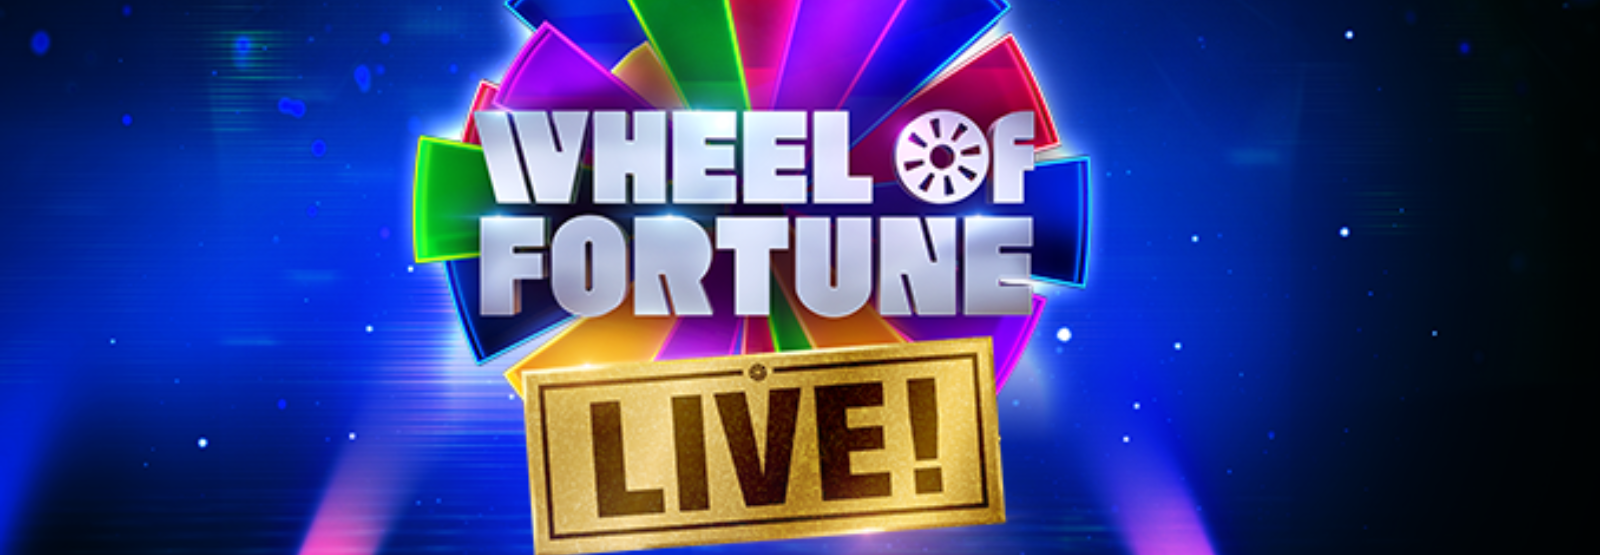 Wheel of Fortune LIVE